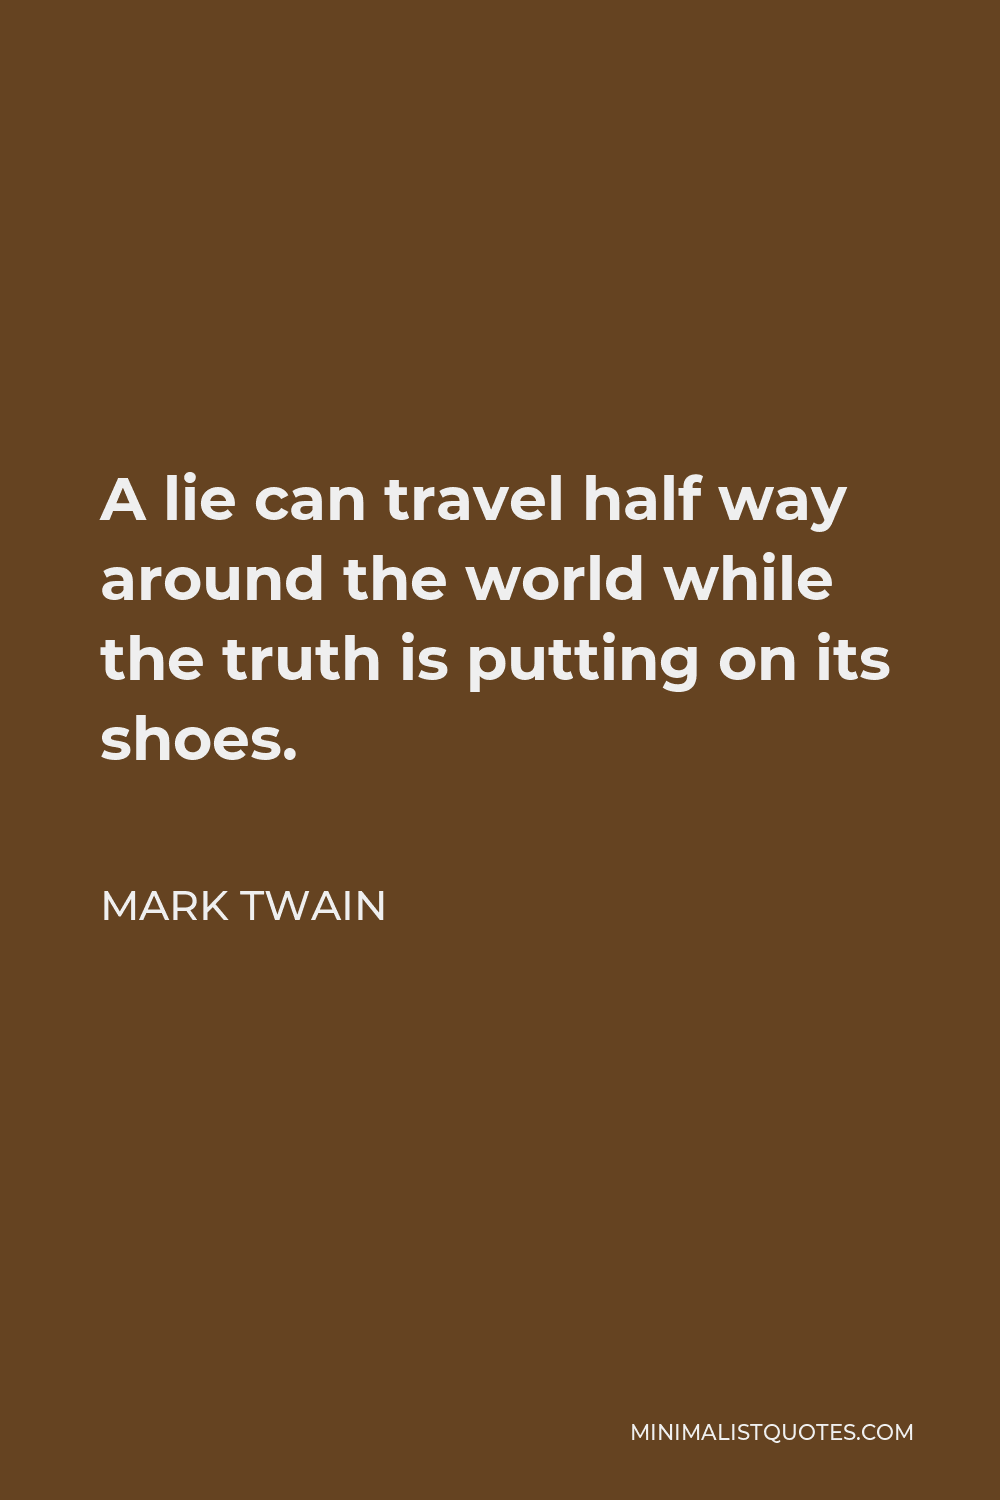 Charles Spurgeon Quote - A lie can travel half way around the world while the truth is putting on its shoes.